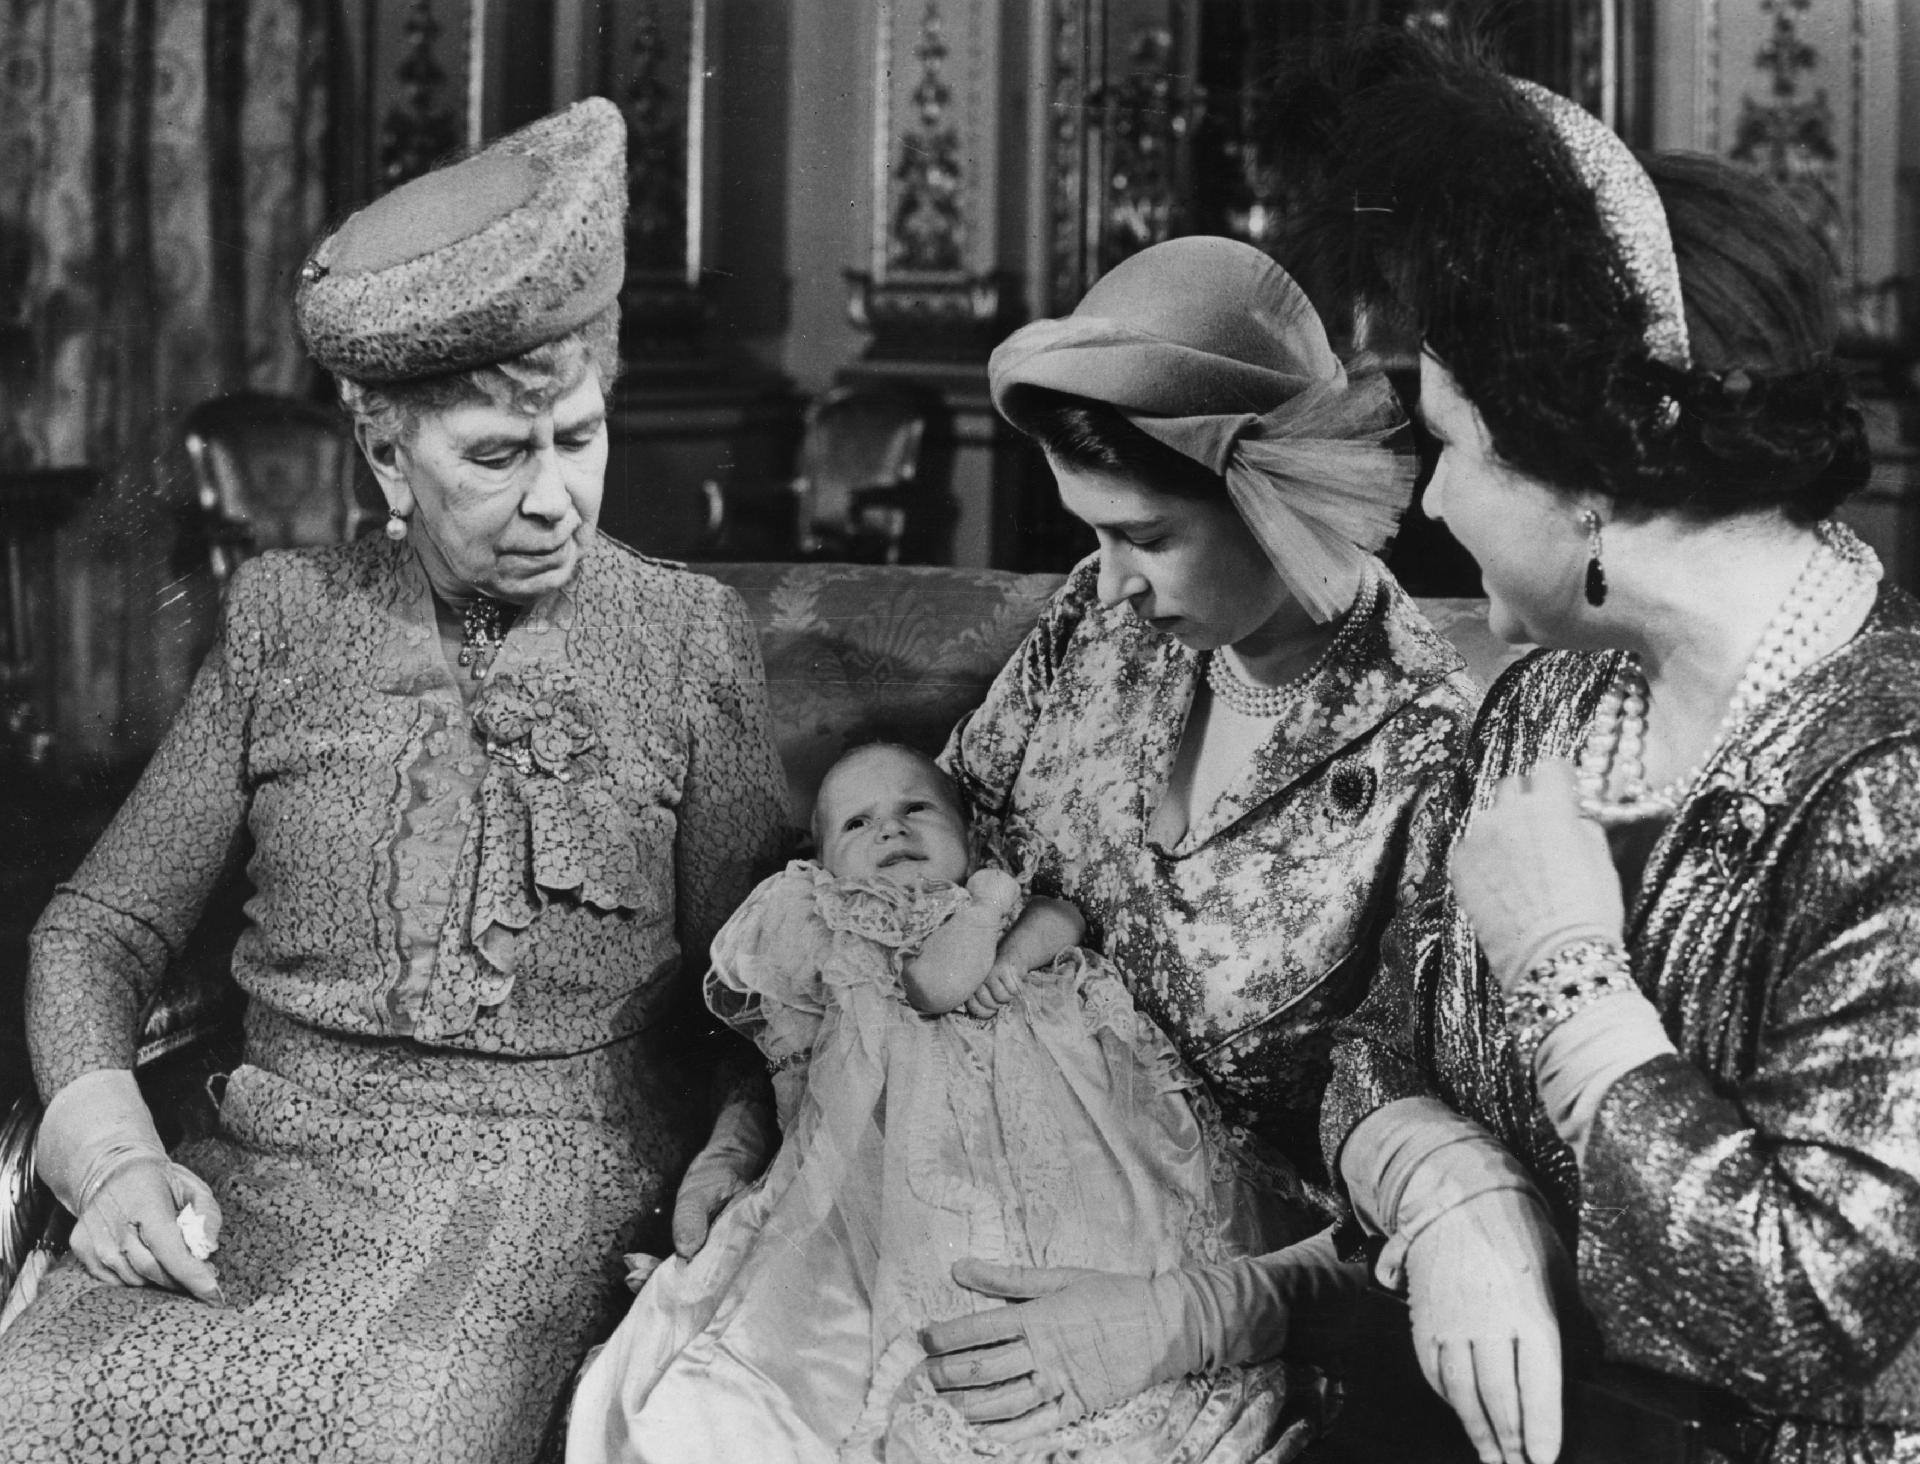 Four generations of the British royal family: Queen Elizabeth II, her daughter Anne in her arms, with her mother and grandmother.  - Keystone/Getty Images